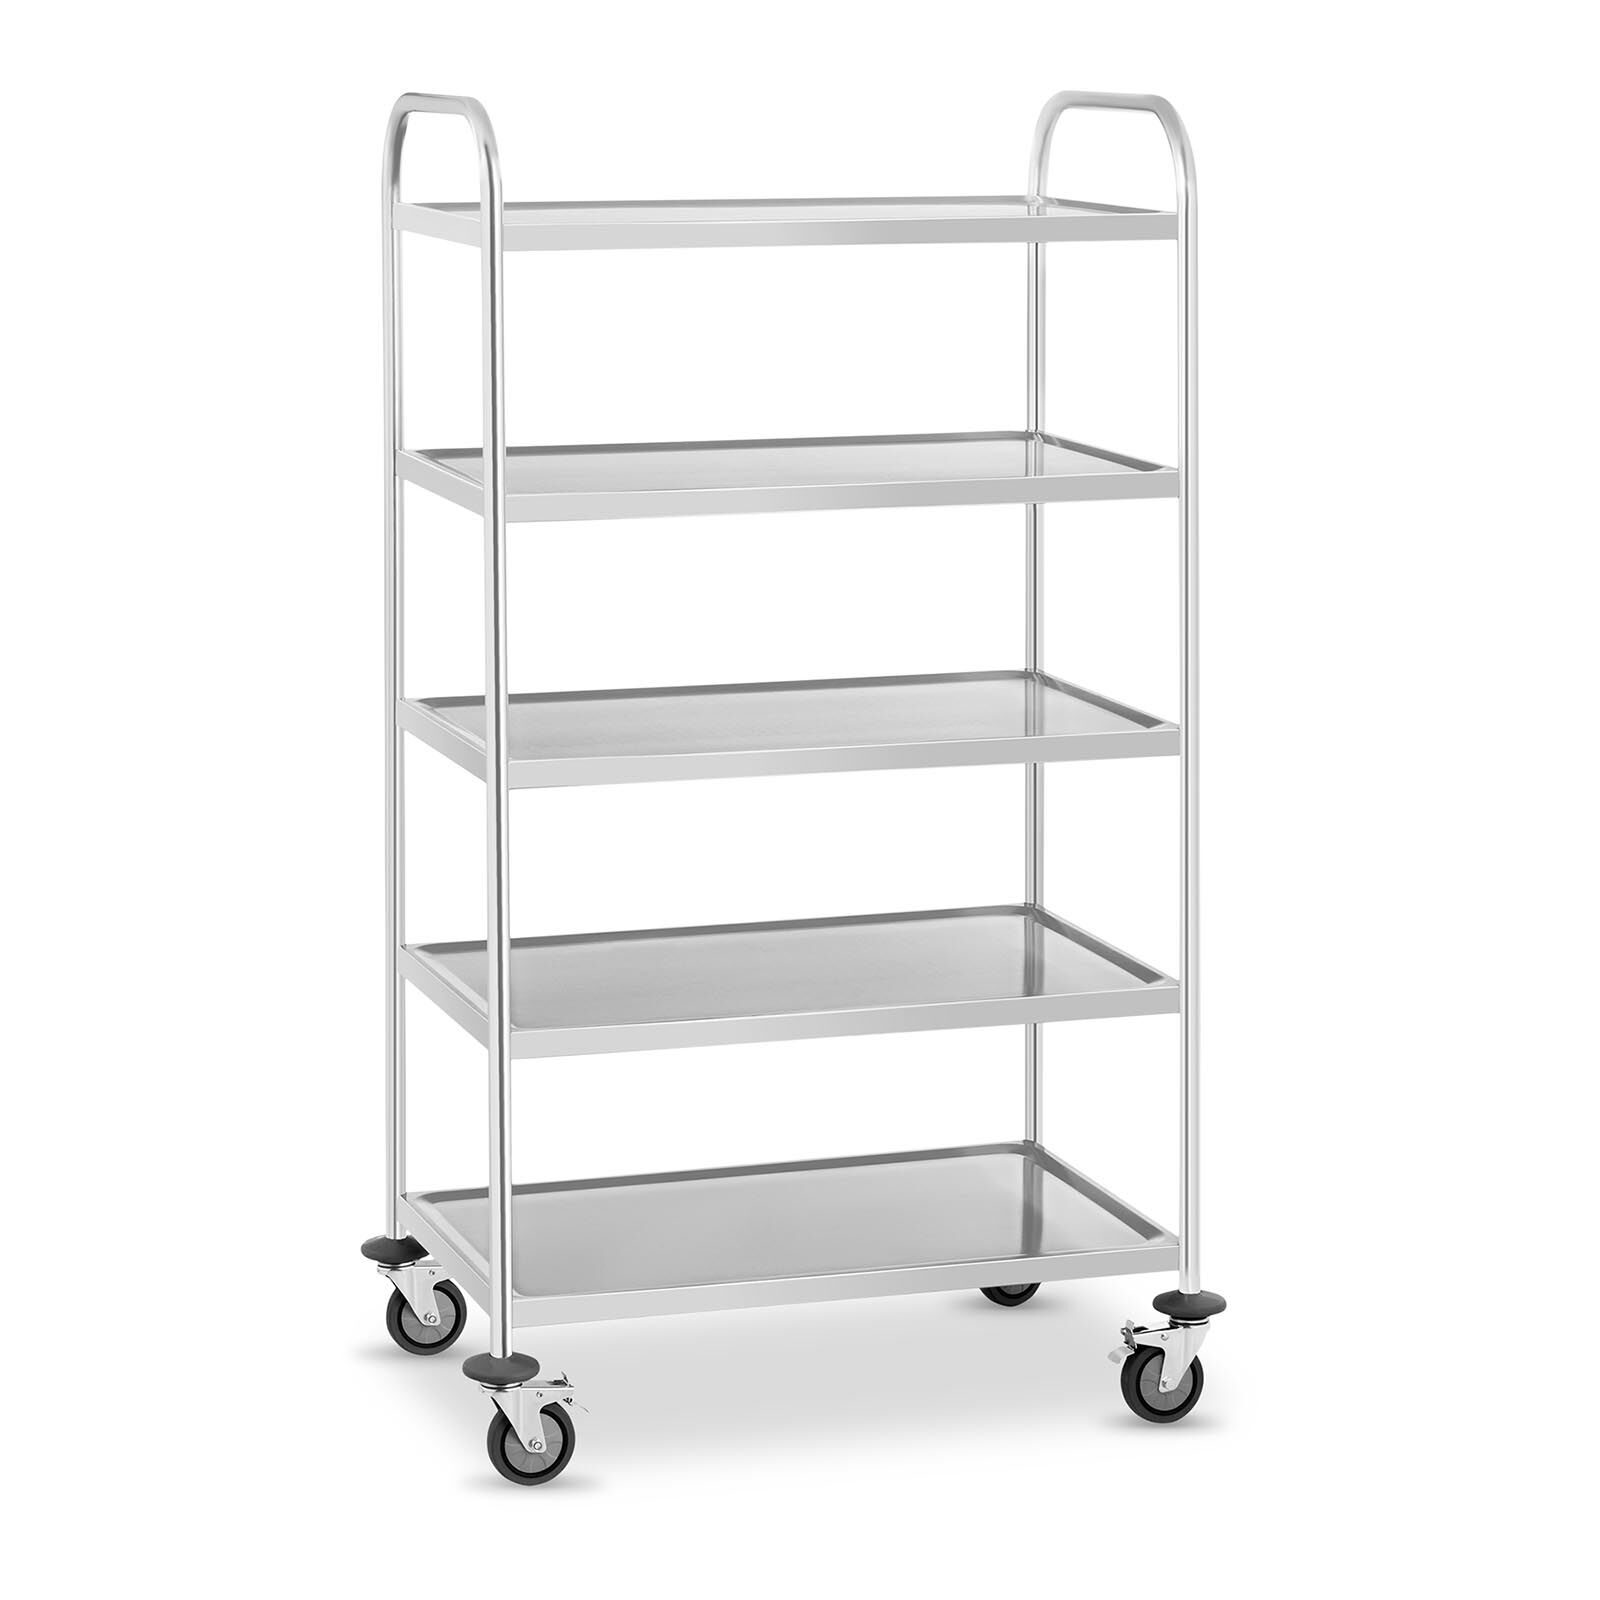 Royal Catering Stainless Steel Serving Trolley - 5 Shelves - Up To 250 kg RCSW-5.1